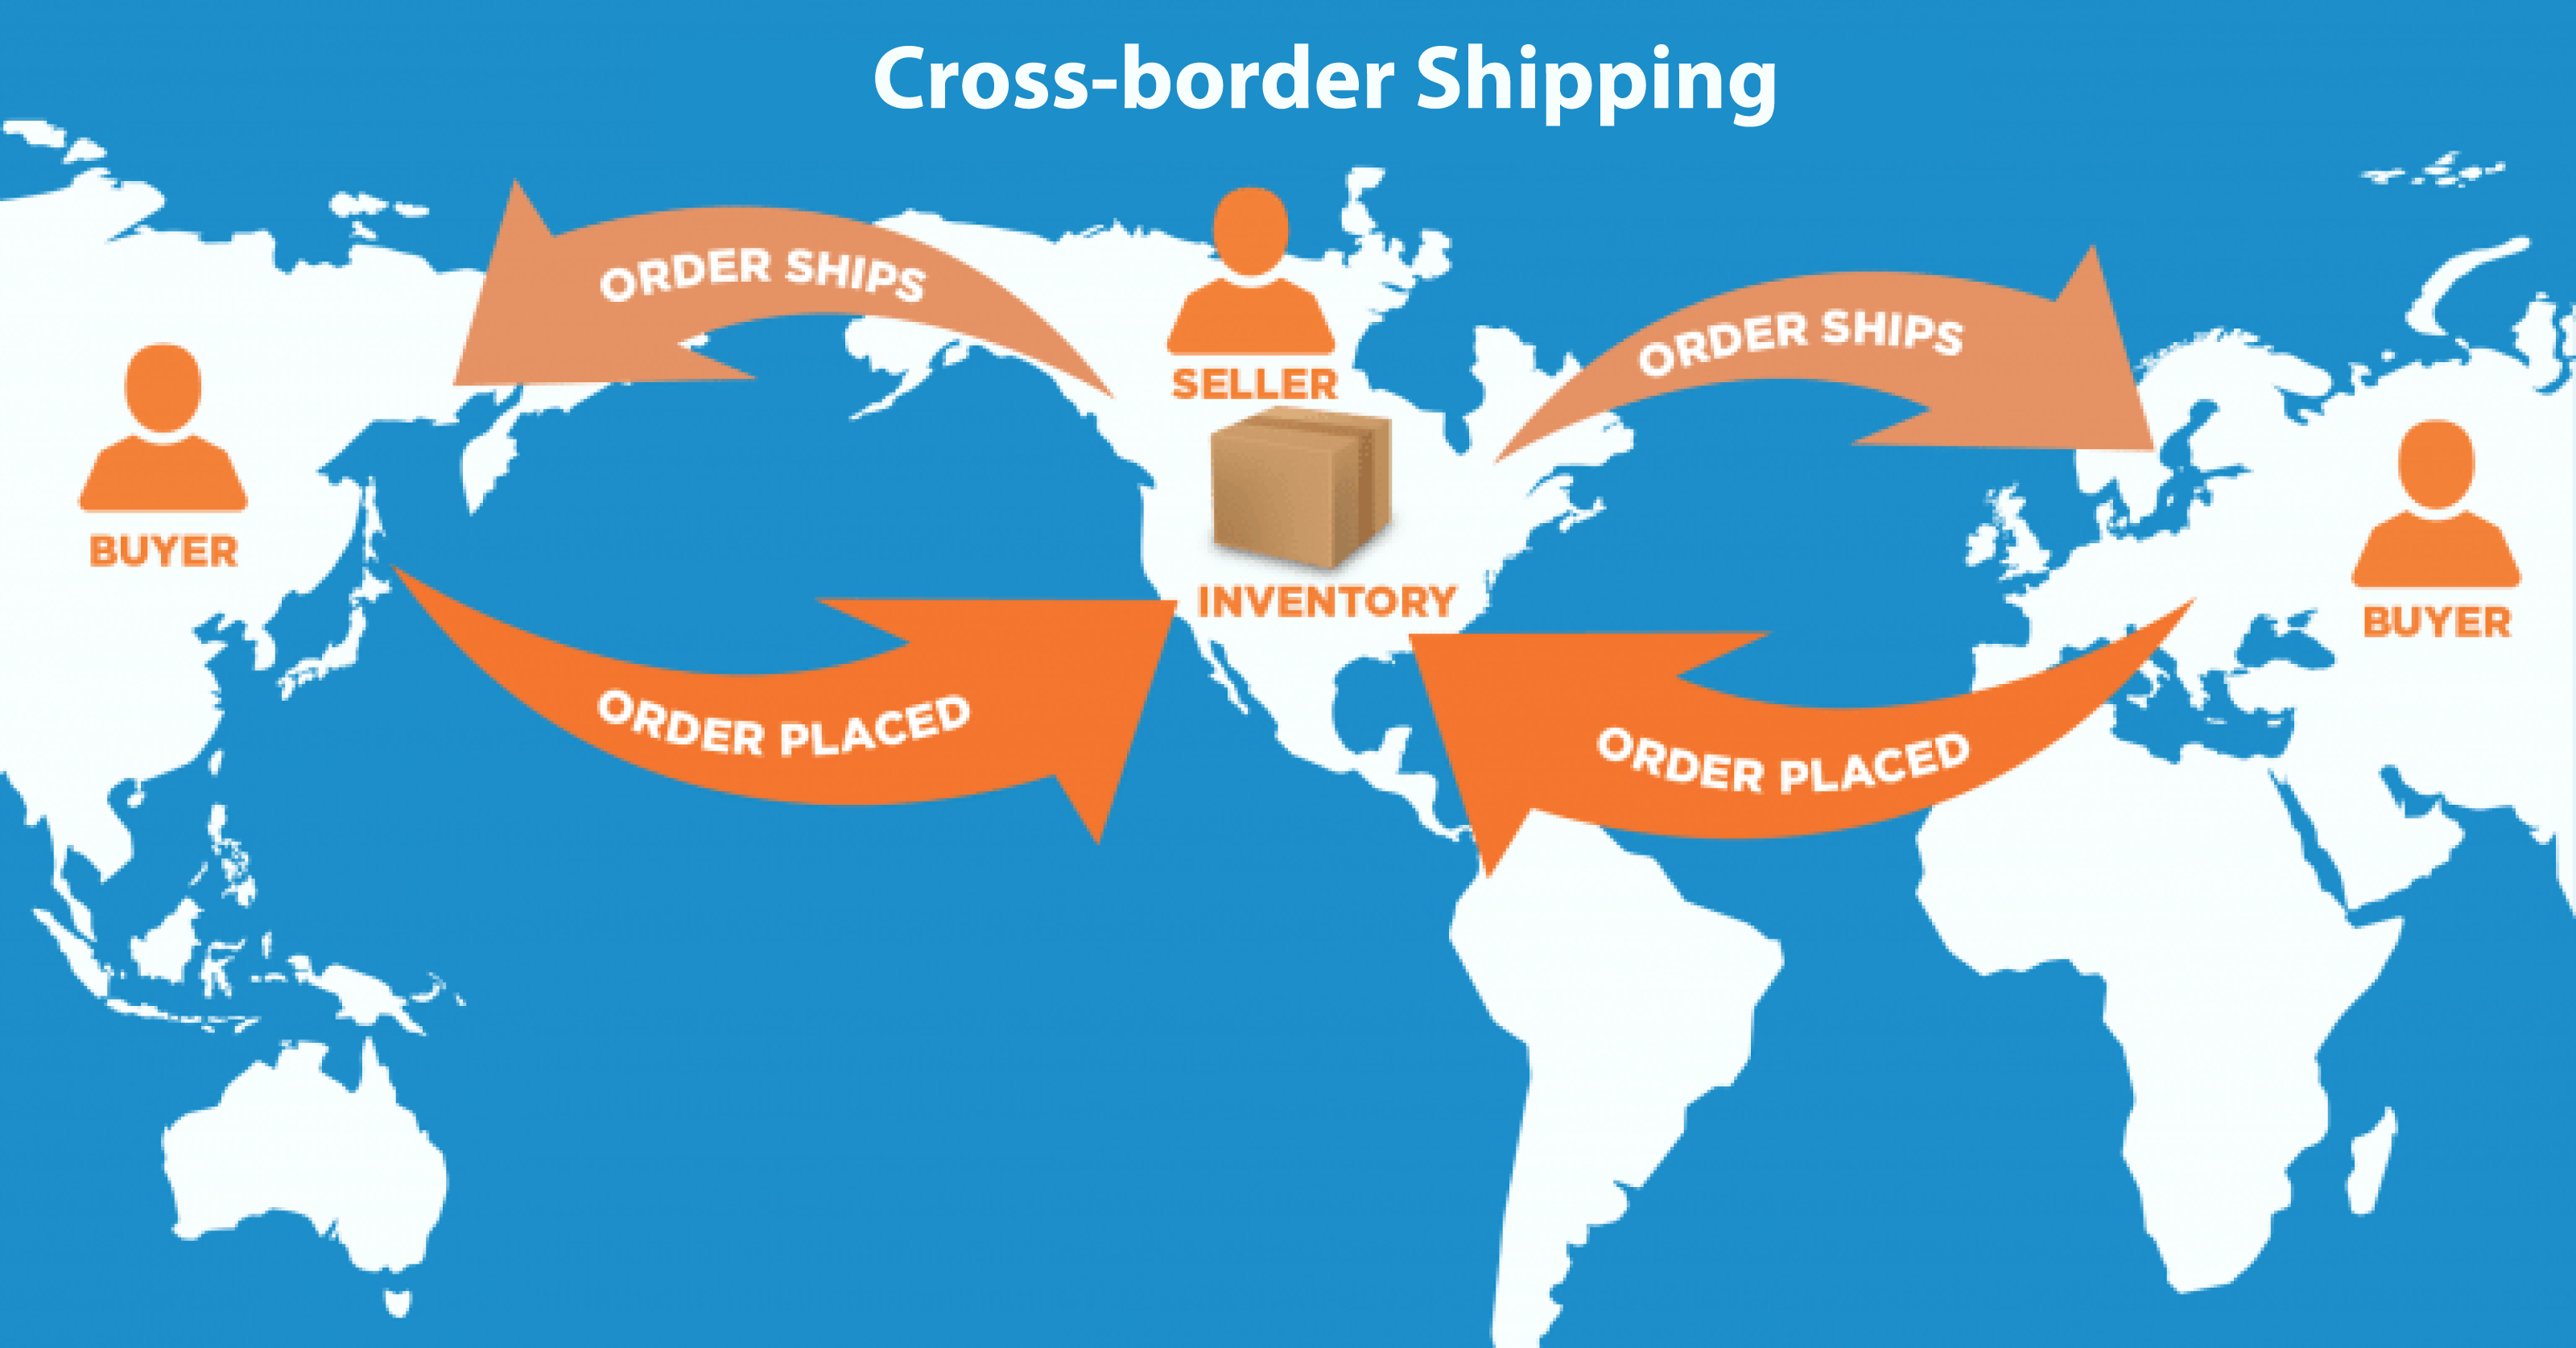 Cross-border Shipping & Fulfillment: The Ultimate Solutions 2